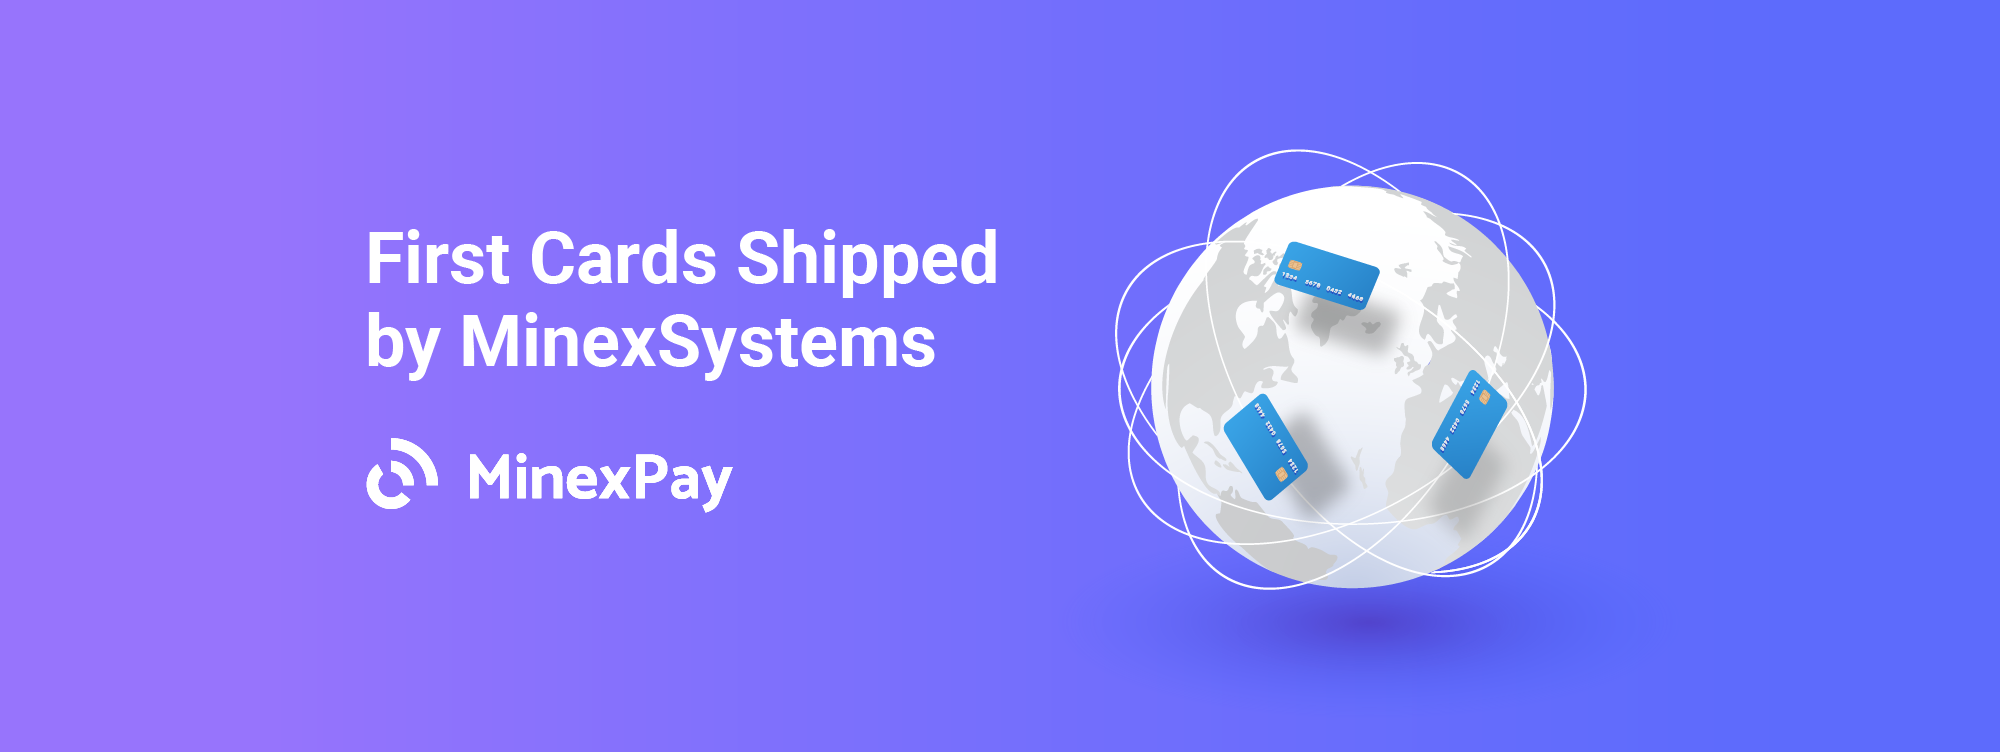 Press Release: MinexSystems Ships the Crypto Cards with Global Coverage and Cash-Out Starting at 0%